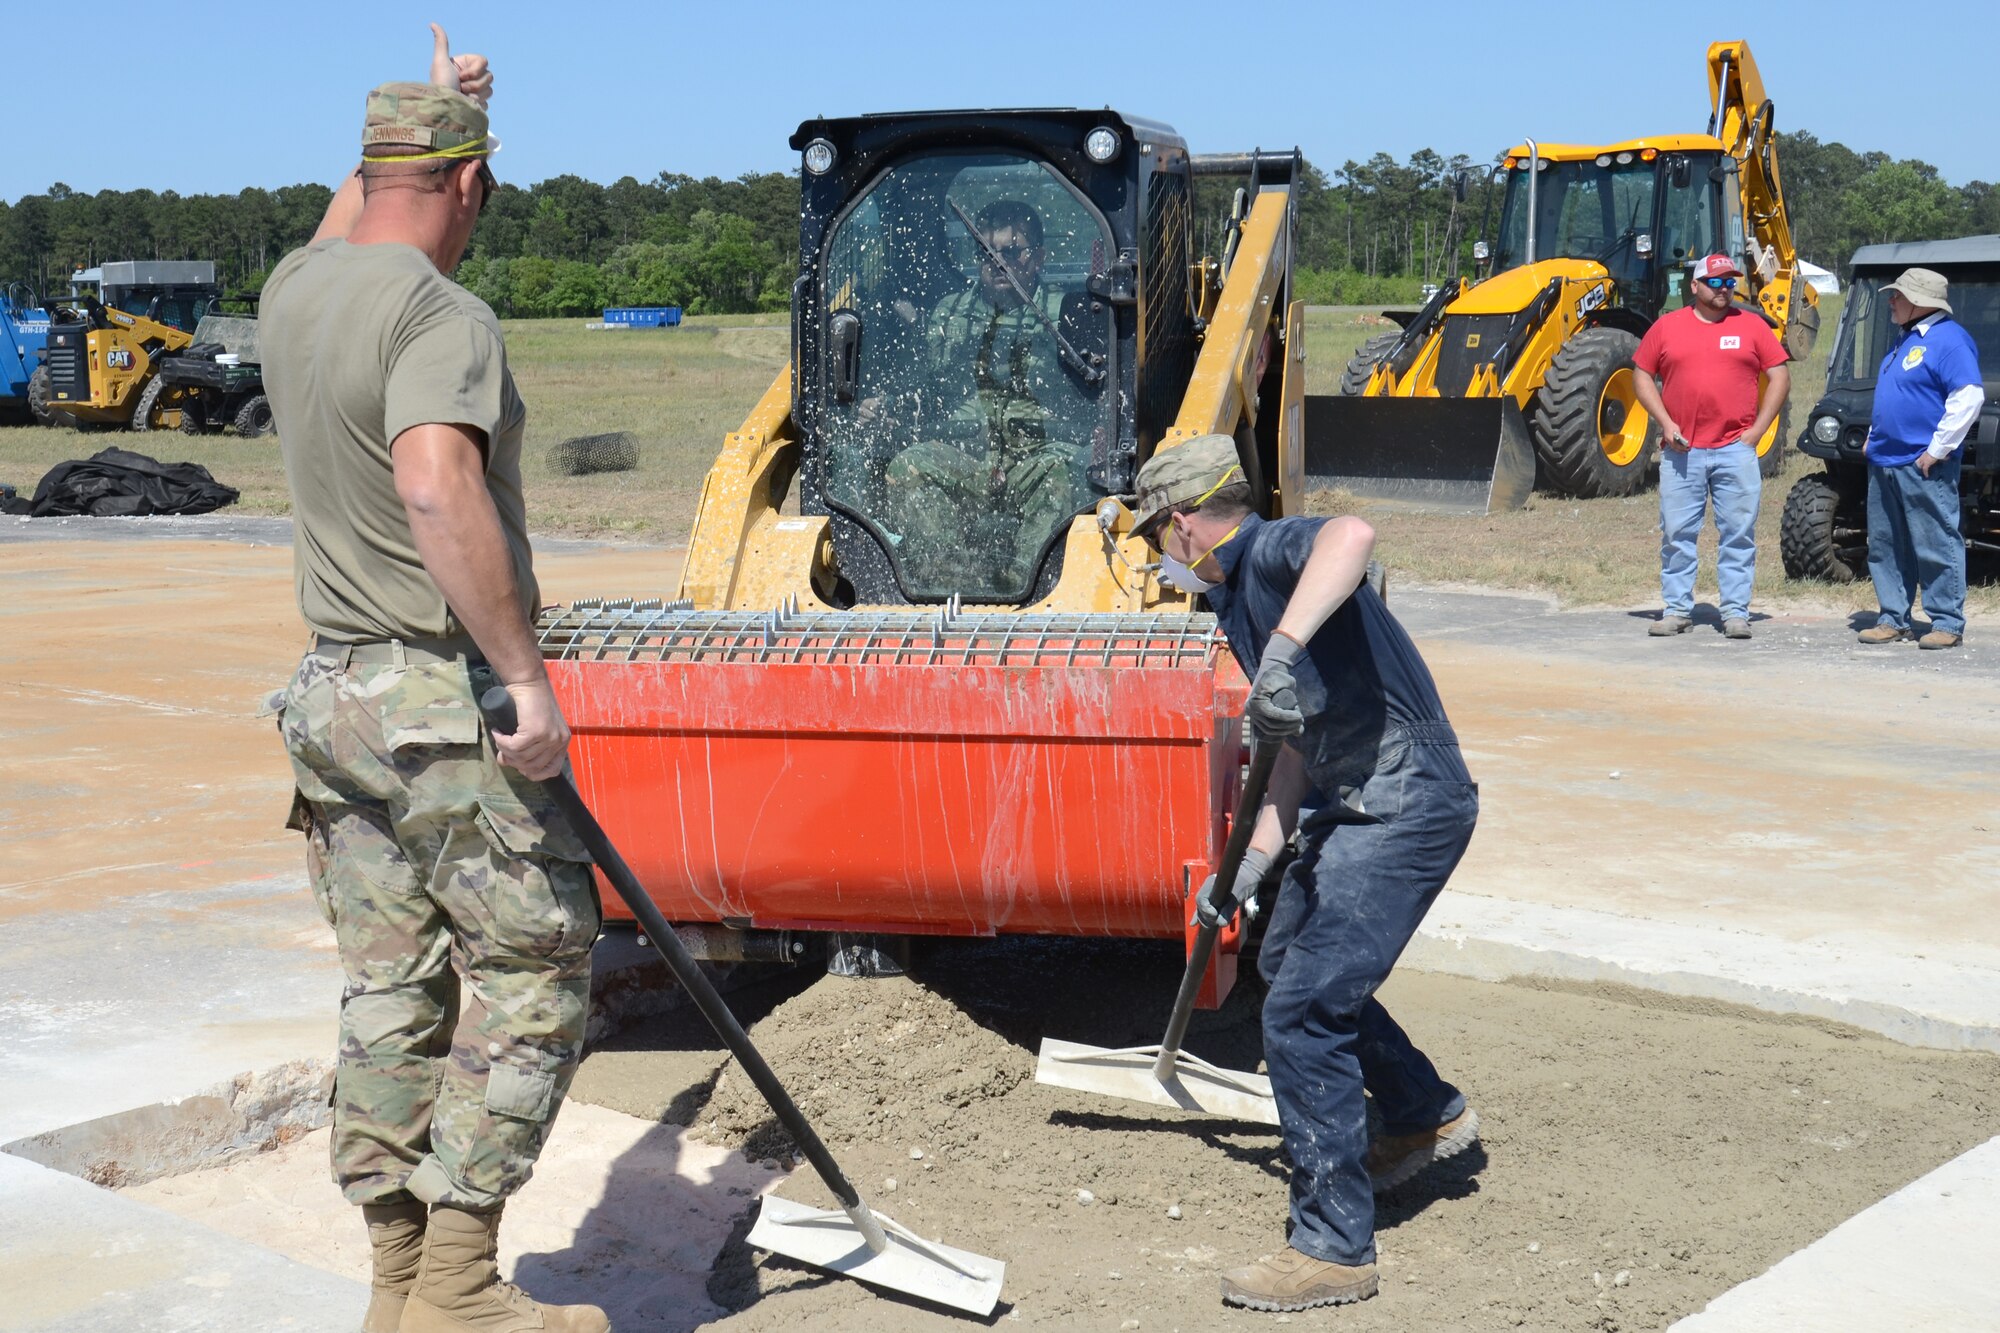 U.S. Air Force Master Sgt. Daniel Jennings and Senior Airman David Poynter, 169th Civil Engineer Squadron heavy equipment operators, place poured concrete into a repaired section of runway during an Expedient and Expeditionary Airfield Damage Repair (E-ADR) Joint Capability Technology Demonstration at McEntire Joint National Guard Base, South Carolina, April 22, 2021. The demonstration simulates the rapid repair of a battle damaged runway. (U.S. Air National Guard photo by Lt. Col. Jim St.Clair, 169th Fighter Wing Public Affairs)